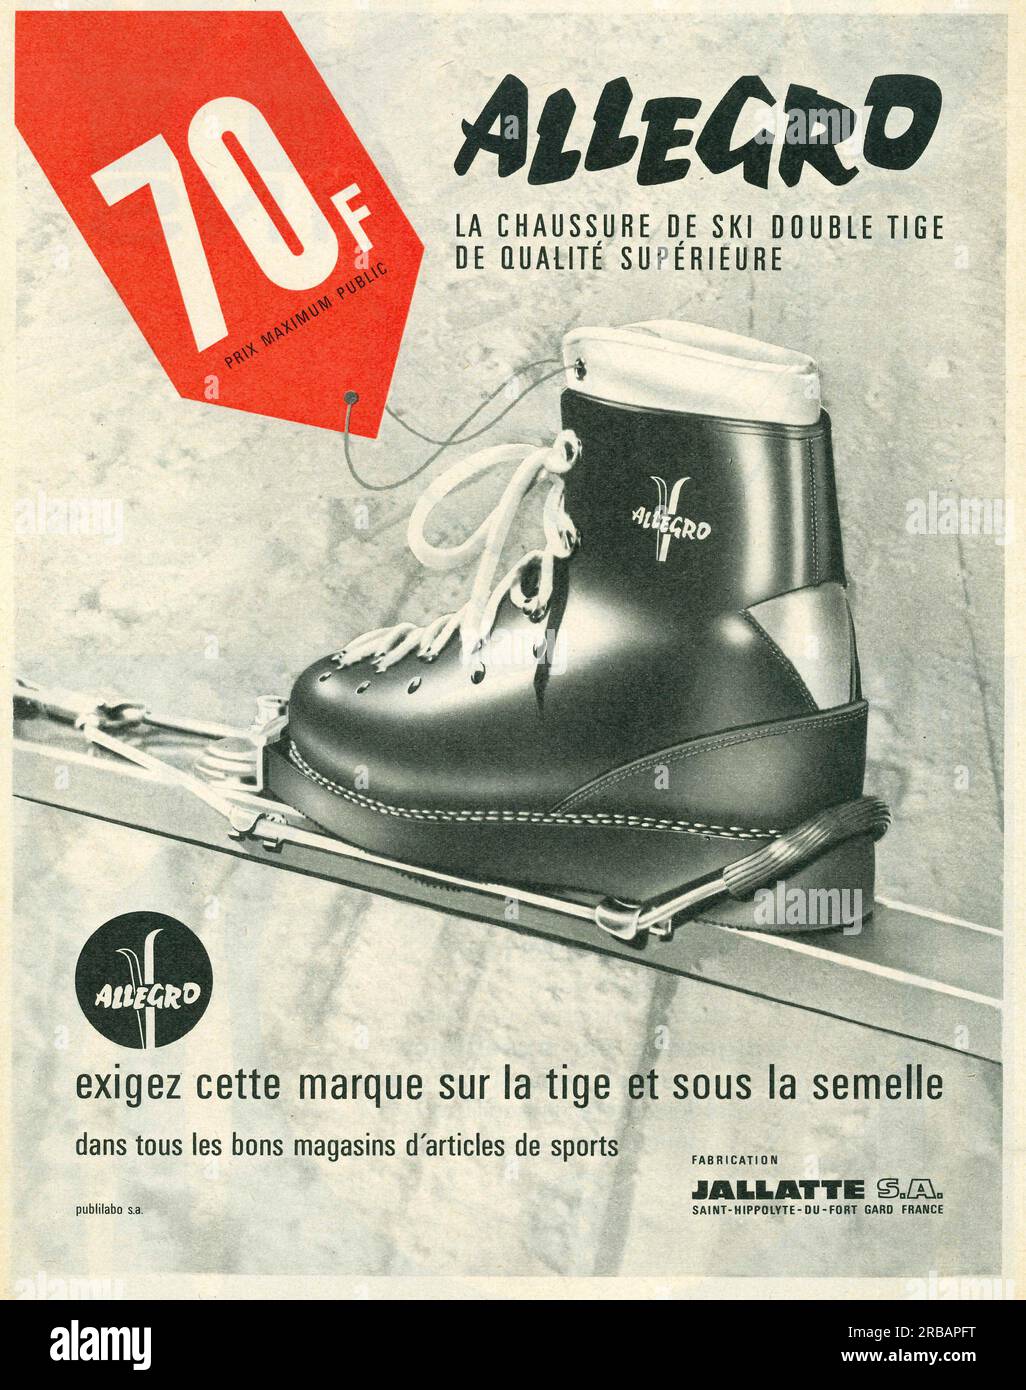 JALLATTE ALLEGRO ski shoes advert in a French magazine 1965 Stock Photo